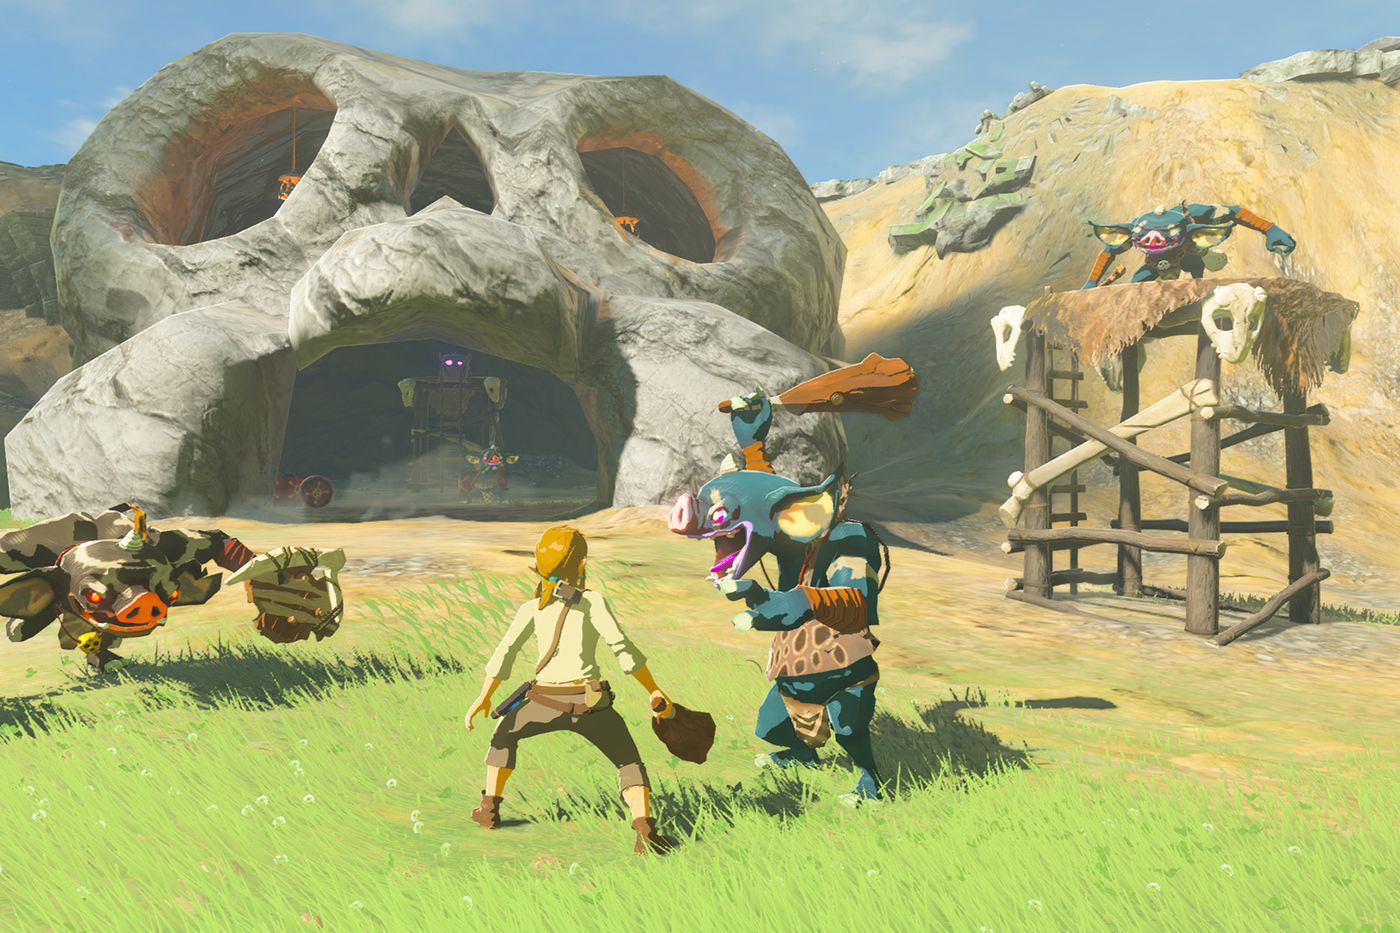 Link from the Legend of Zelda: Breath of the Wild facing enemy bokoblins in front of a large skull cave